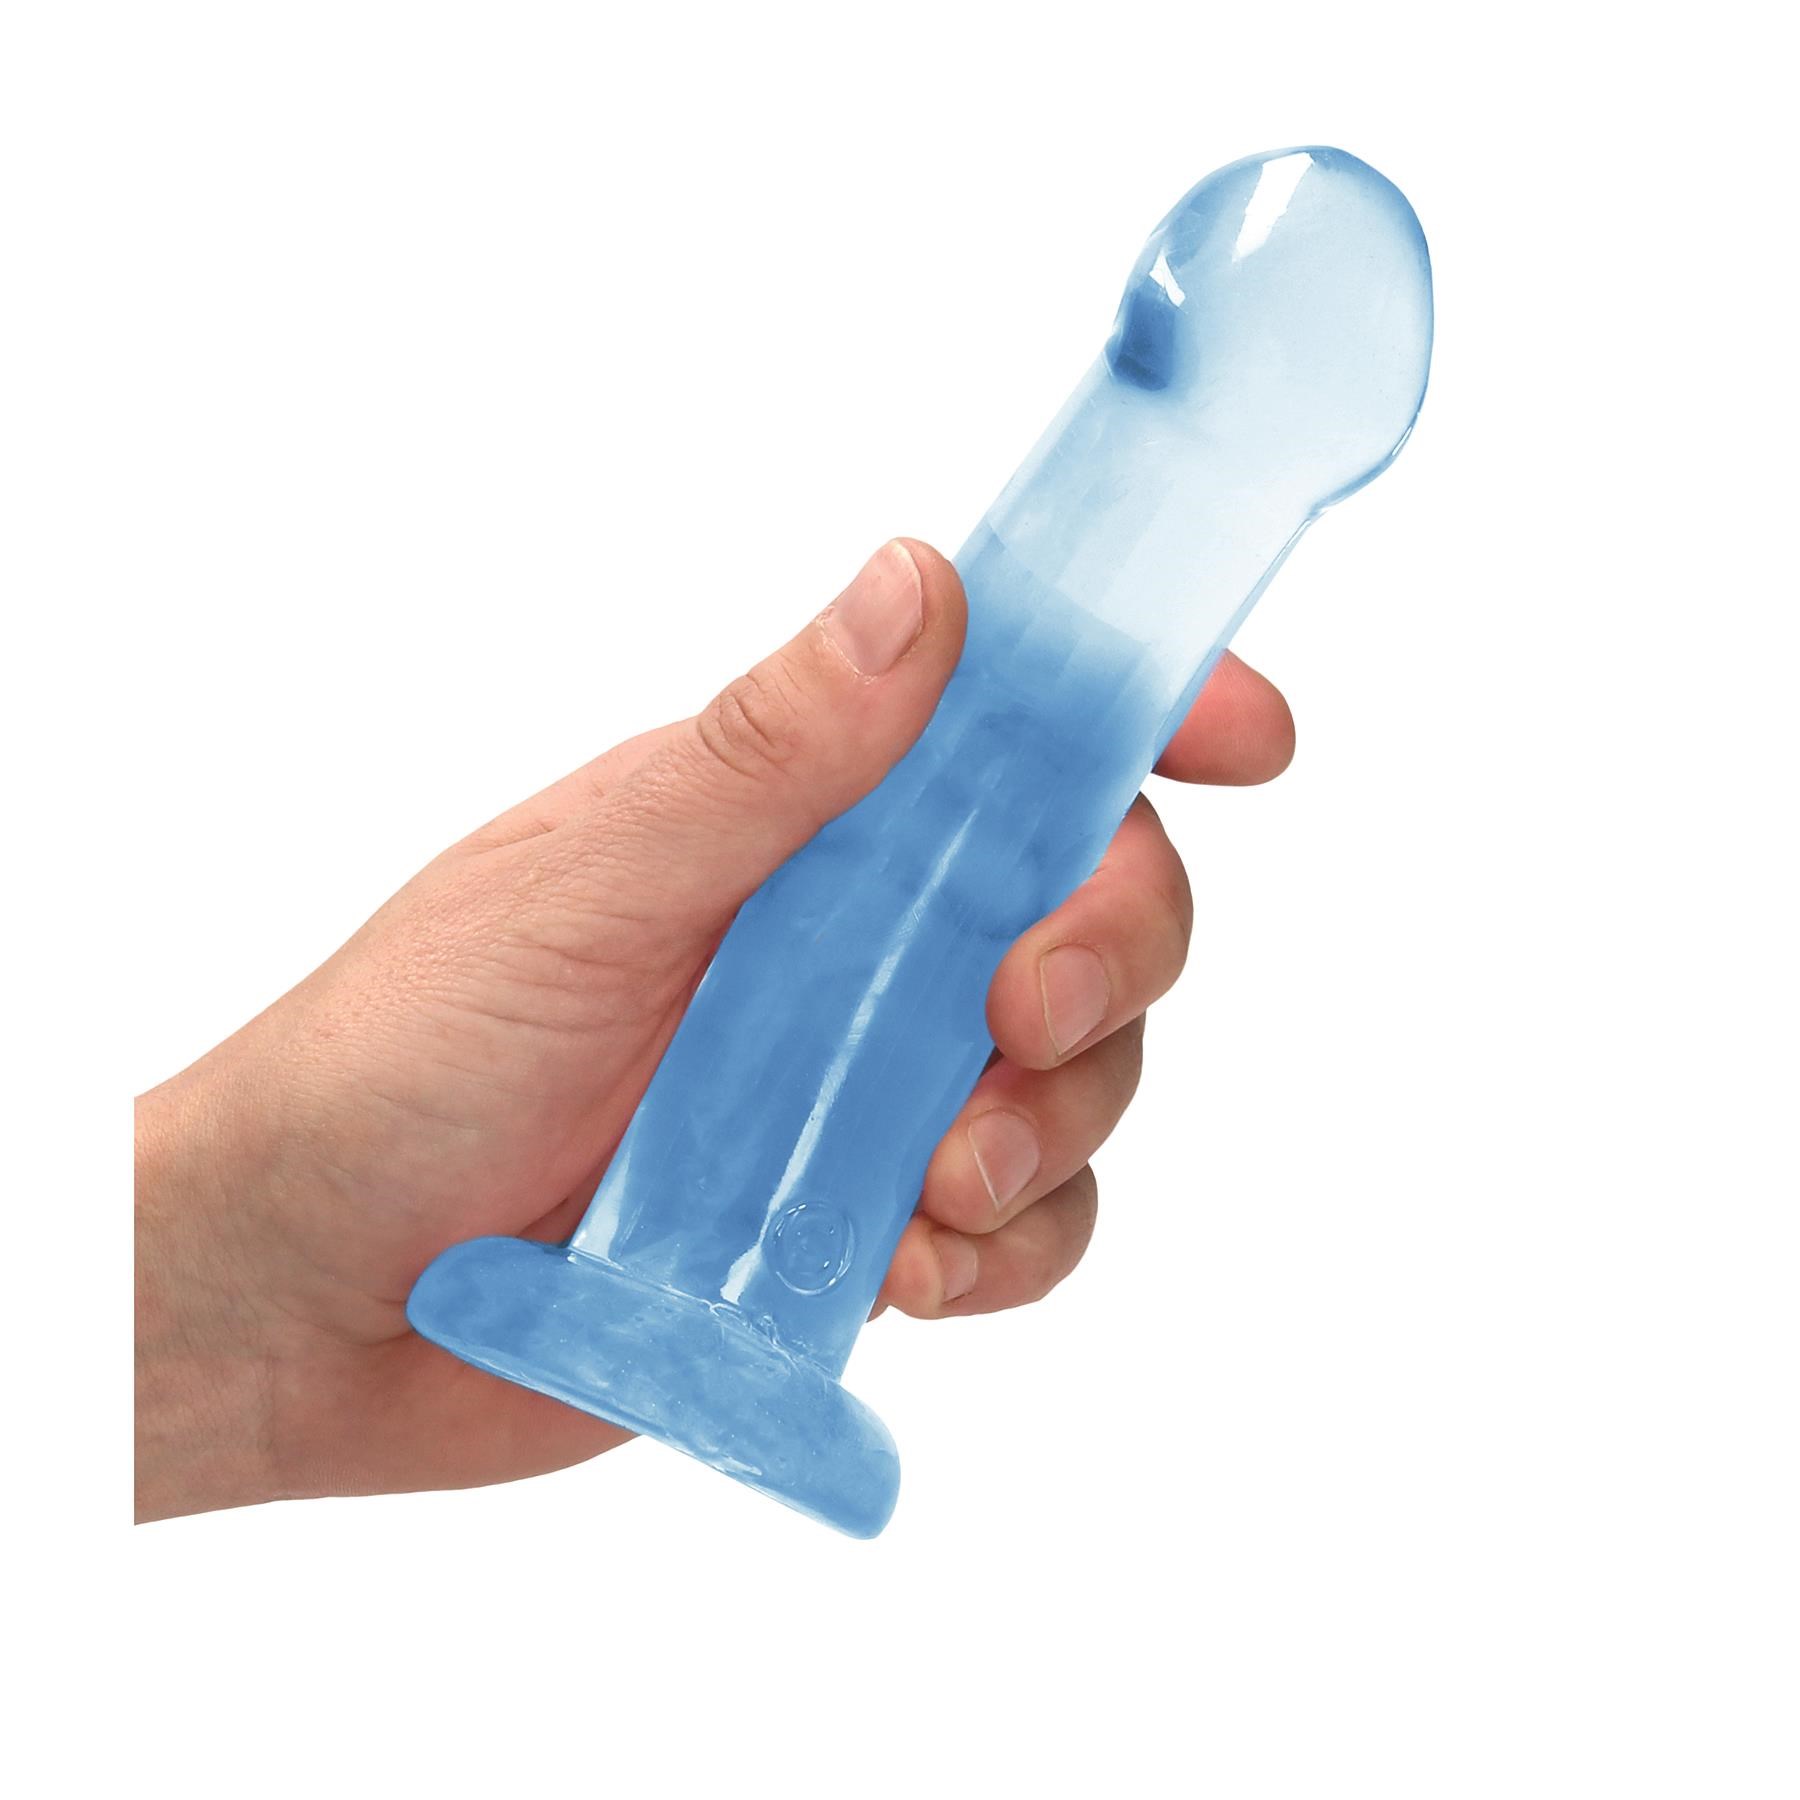 RealRock Non Realistic Dildo With Suction Cup - Hand Shot to Show Size